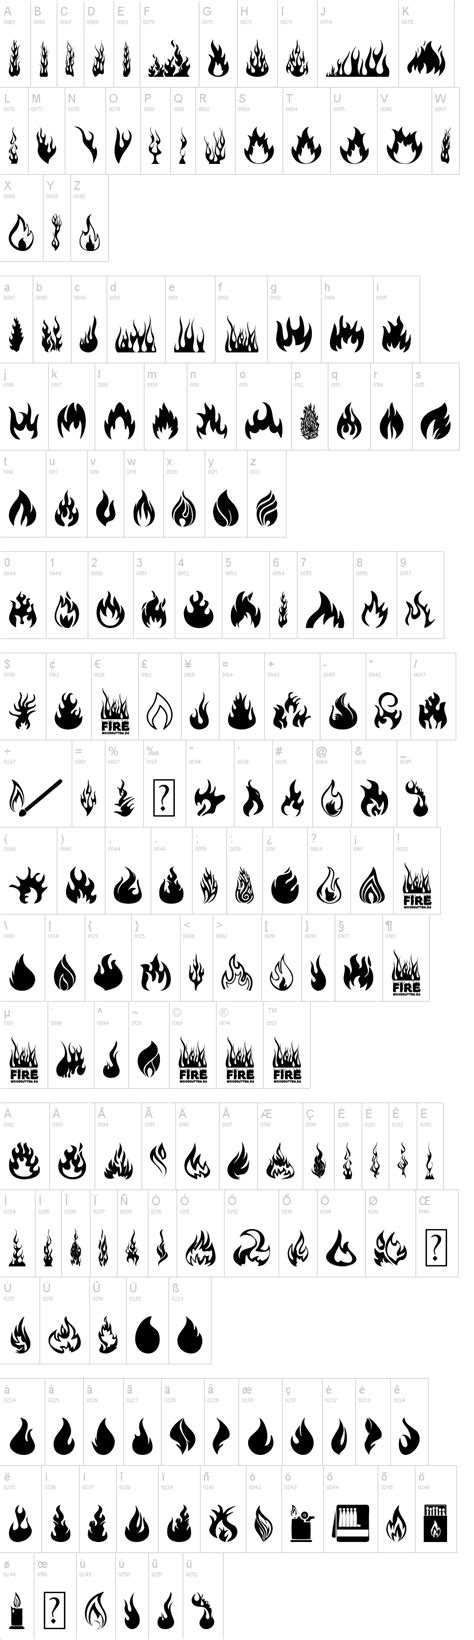 Download fire fonts for windows and macintosh. Fire Font | dafont.com